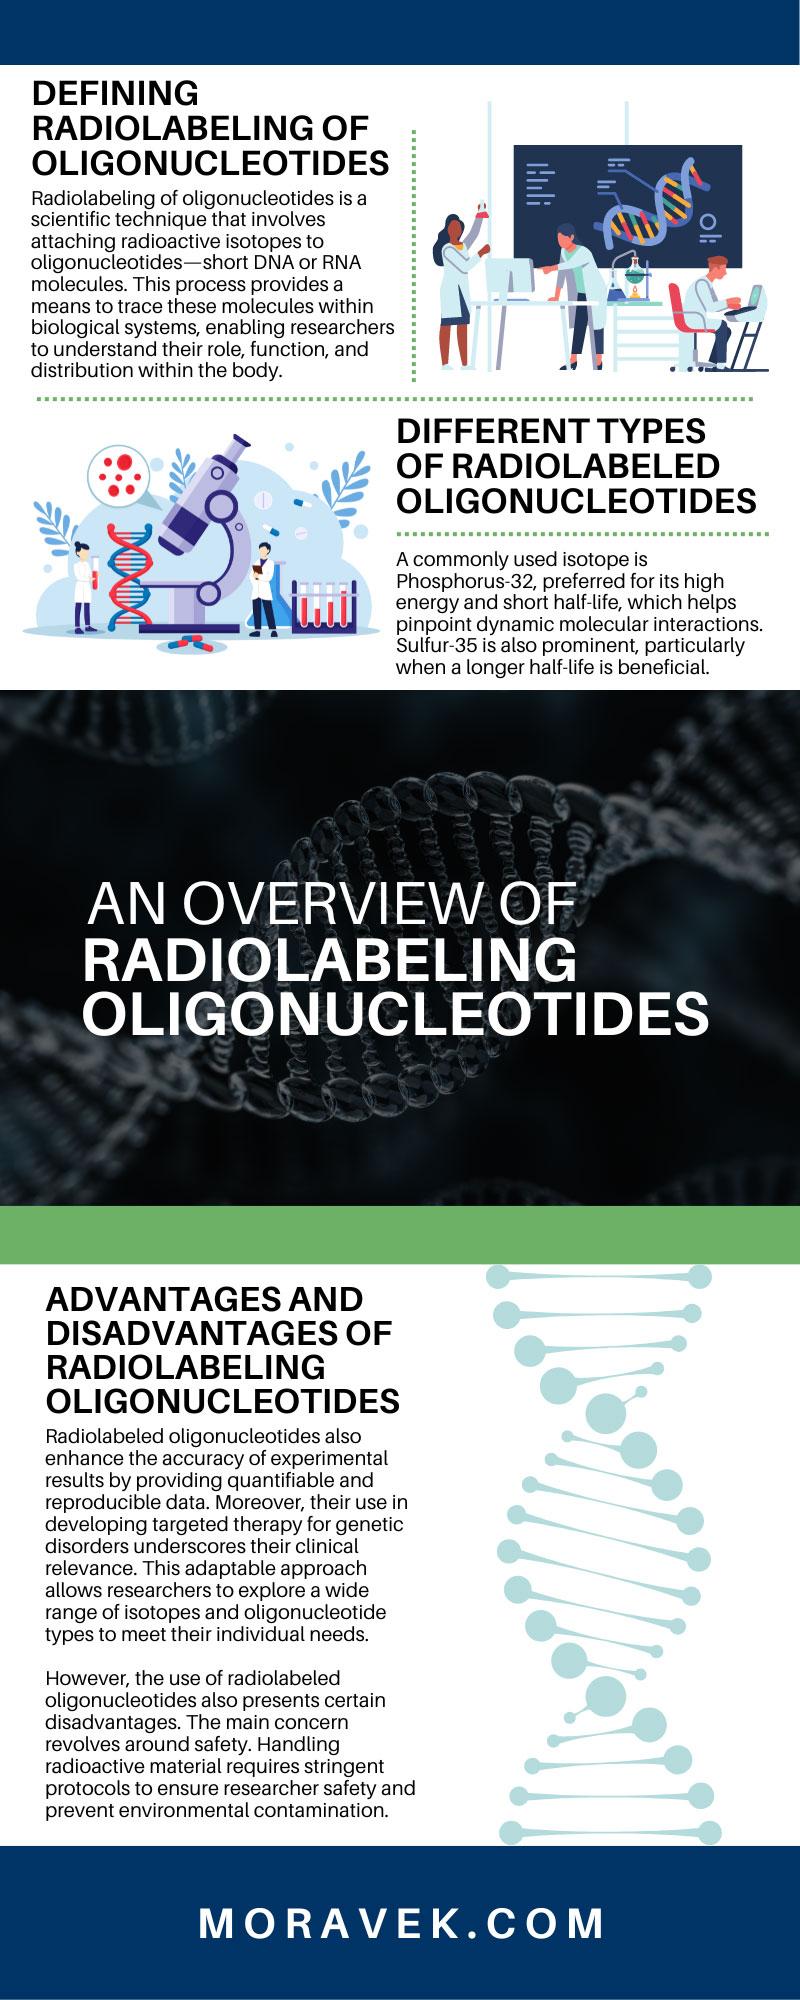 An Overview of Radiolabeling Oligonucleotides